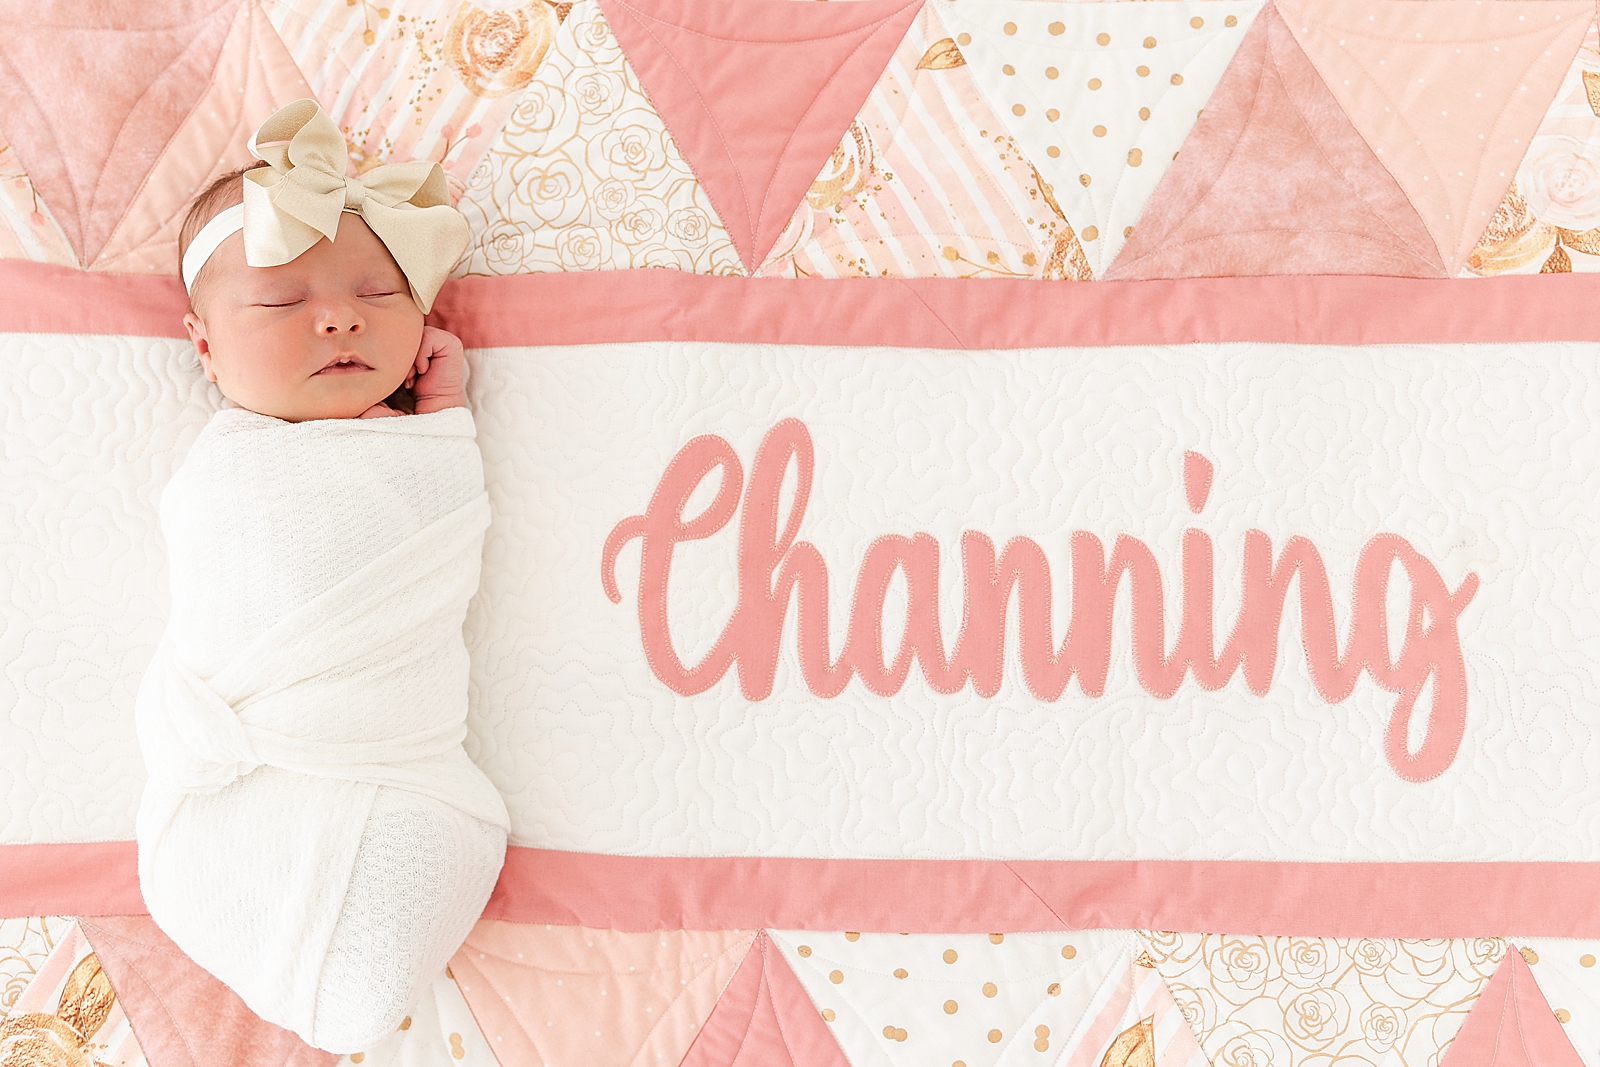 Baby Channing custom pink white and gold newborn quilt with baby in white swaddle and gold bow asleep